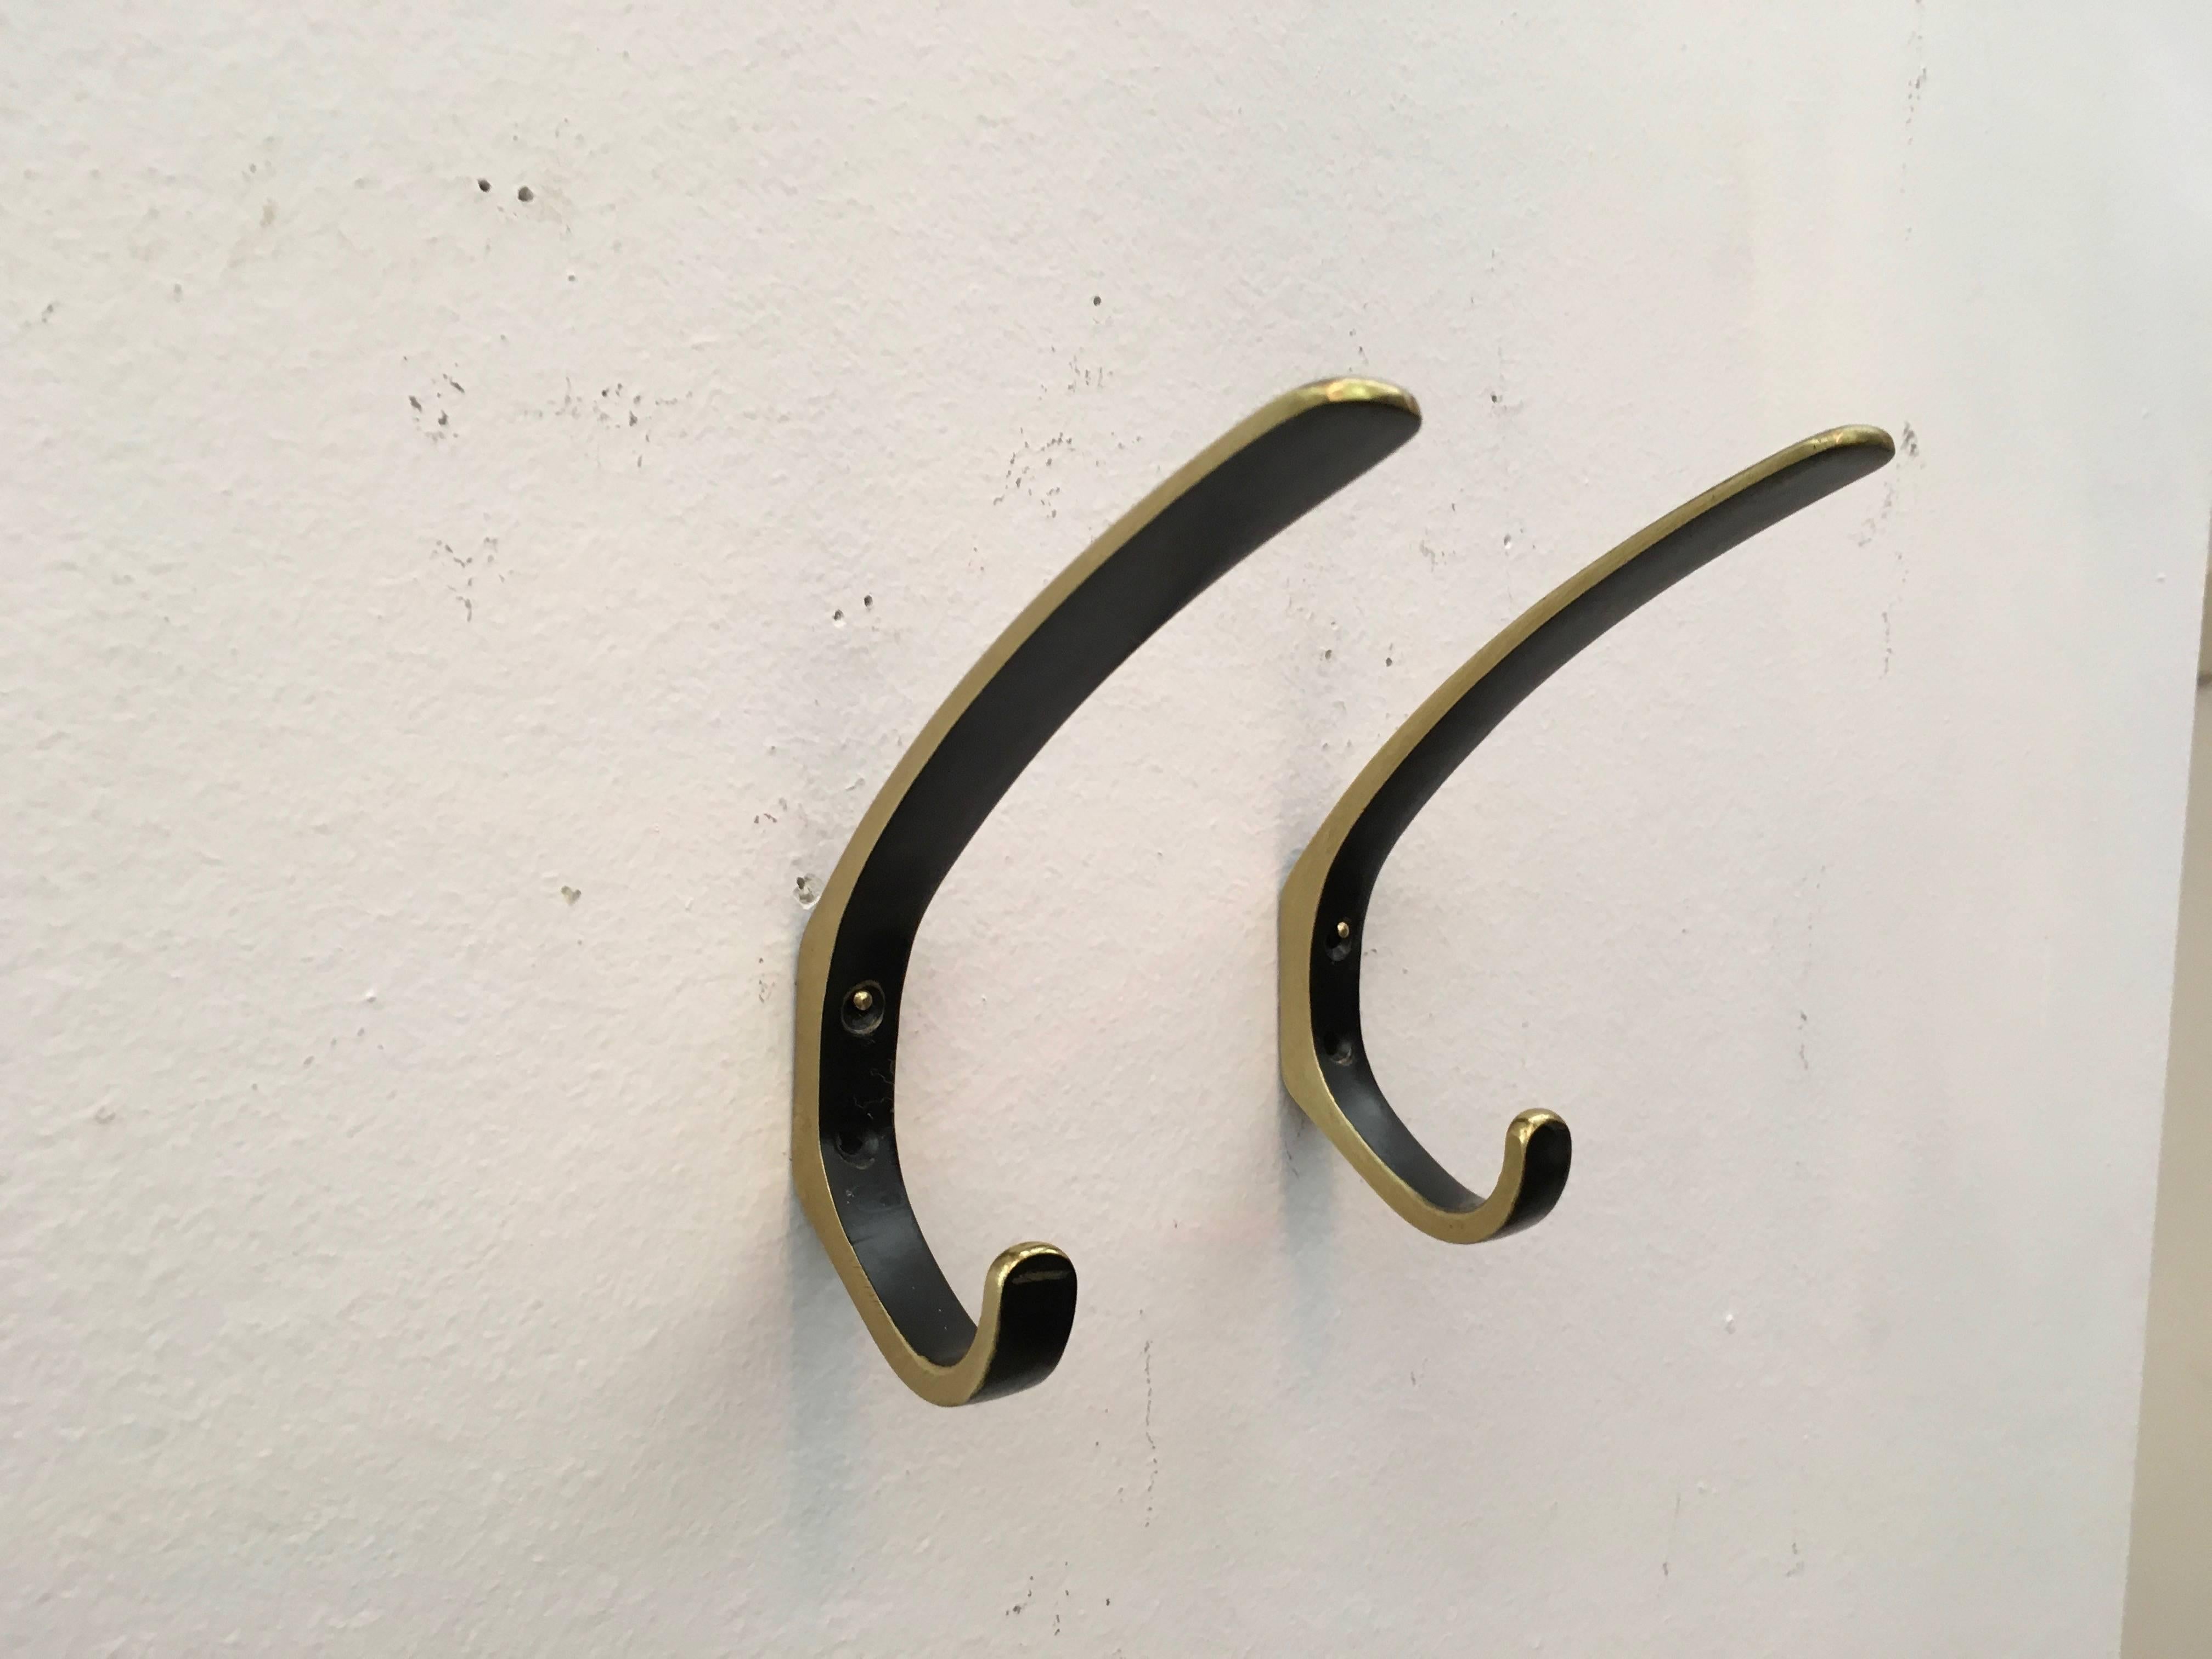 Two beautiful Austrian brass hooks by manufactured by Hertha Baller in Austria in the 1950s.